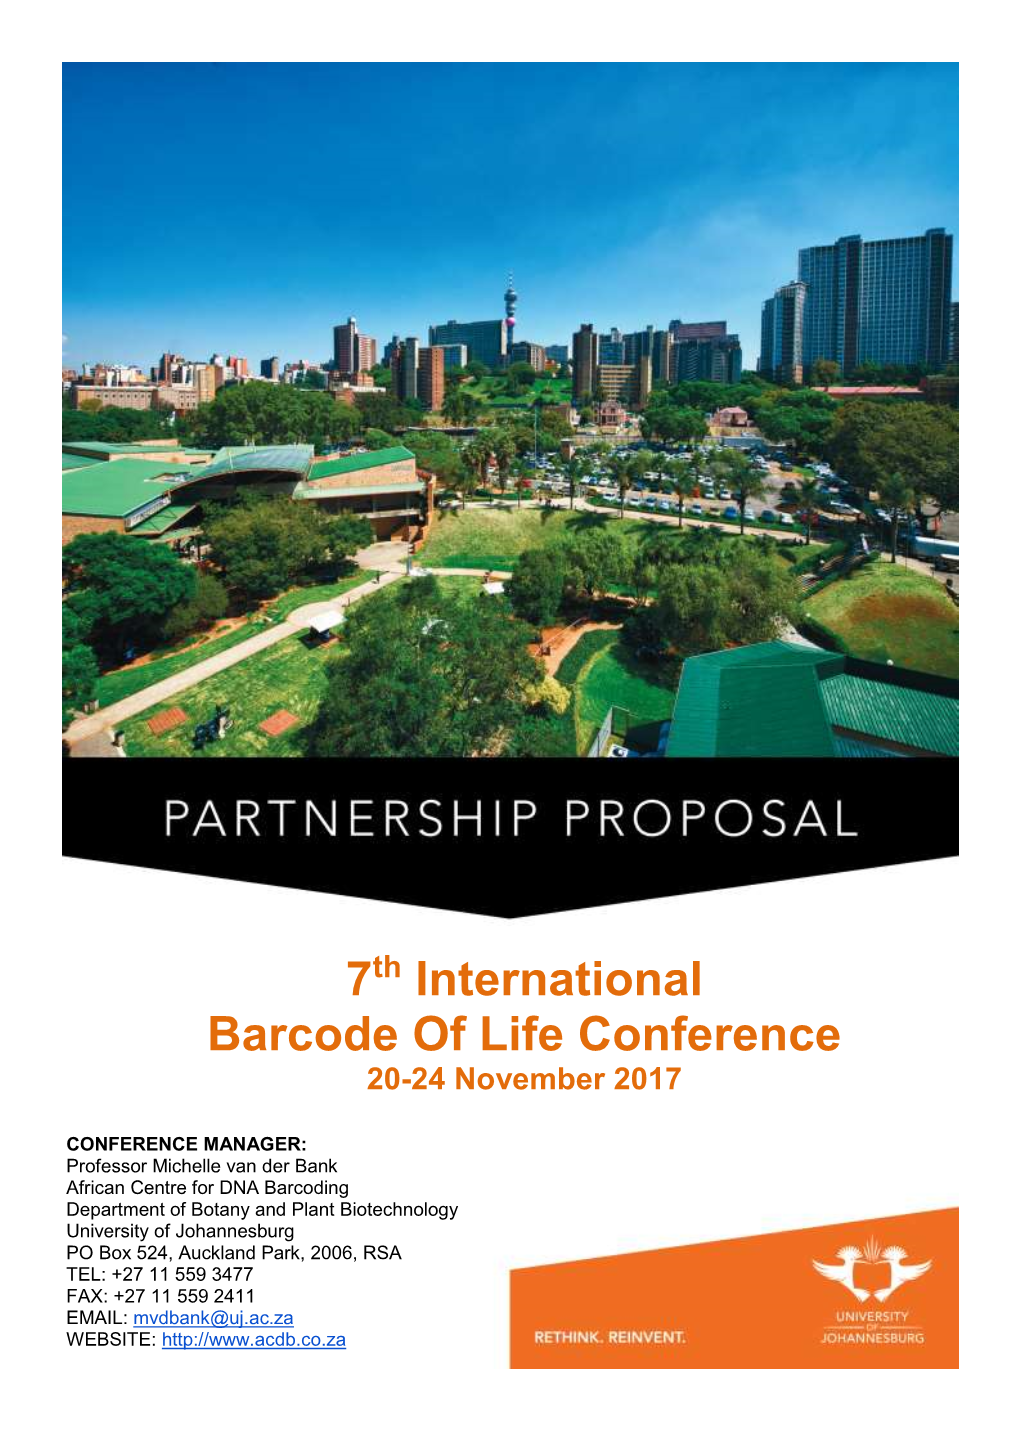 7 International Barcode of Life Conference